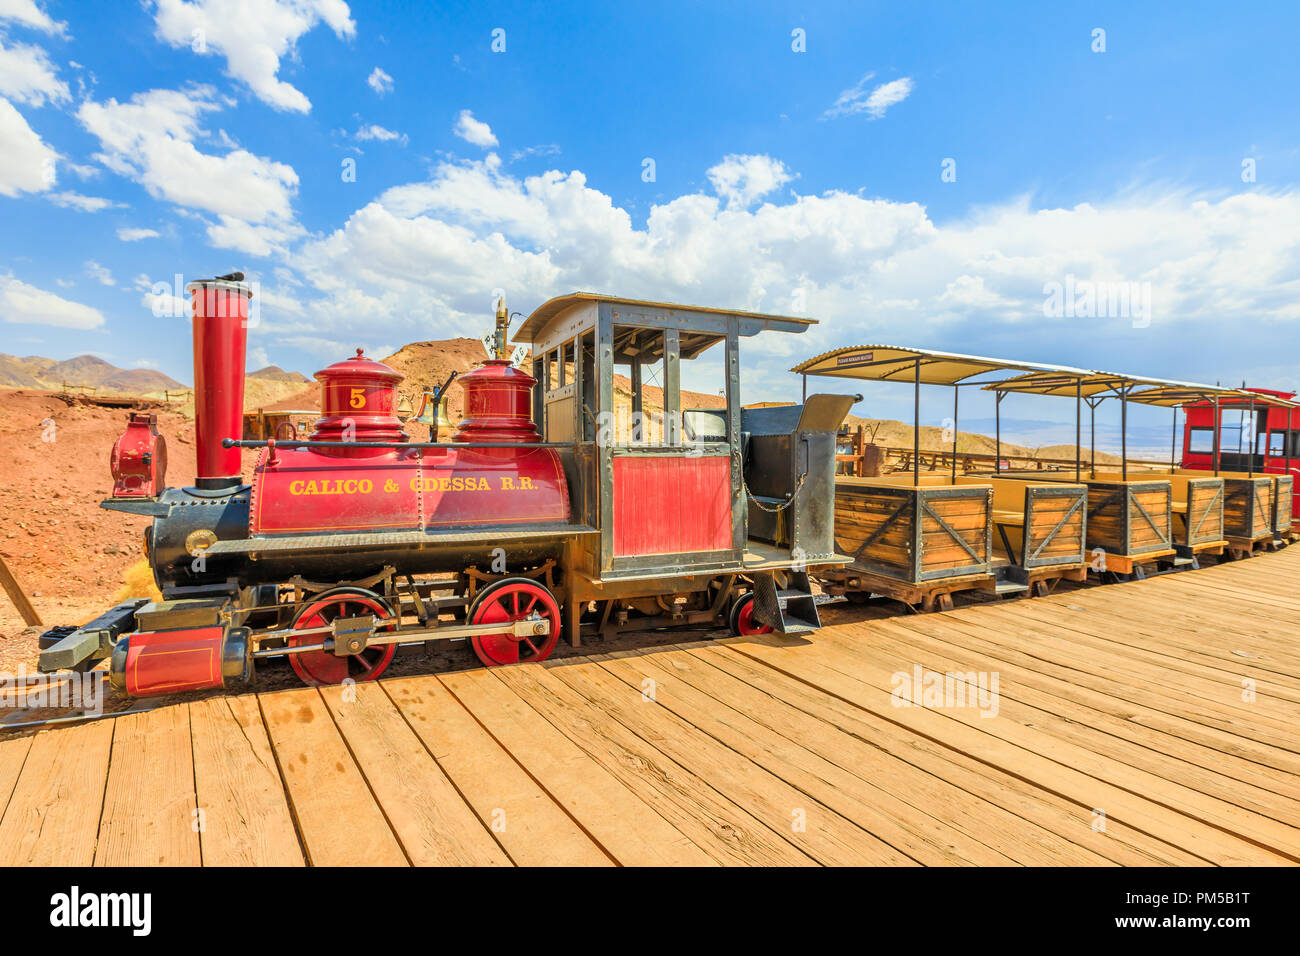 Calico, California, USA - August 15, 2018: Calico Station and Odessa Railroad narrow gauge that with an old steam train does a tour through old mines of Calico Ghost Town, San Bernardino County. Stock Photo